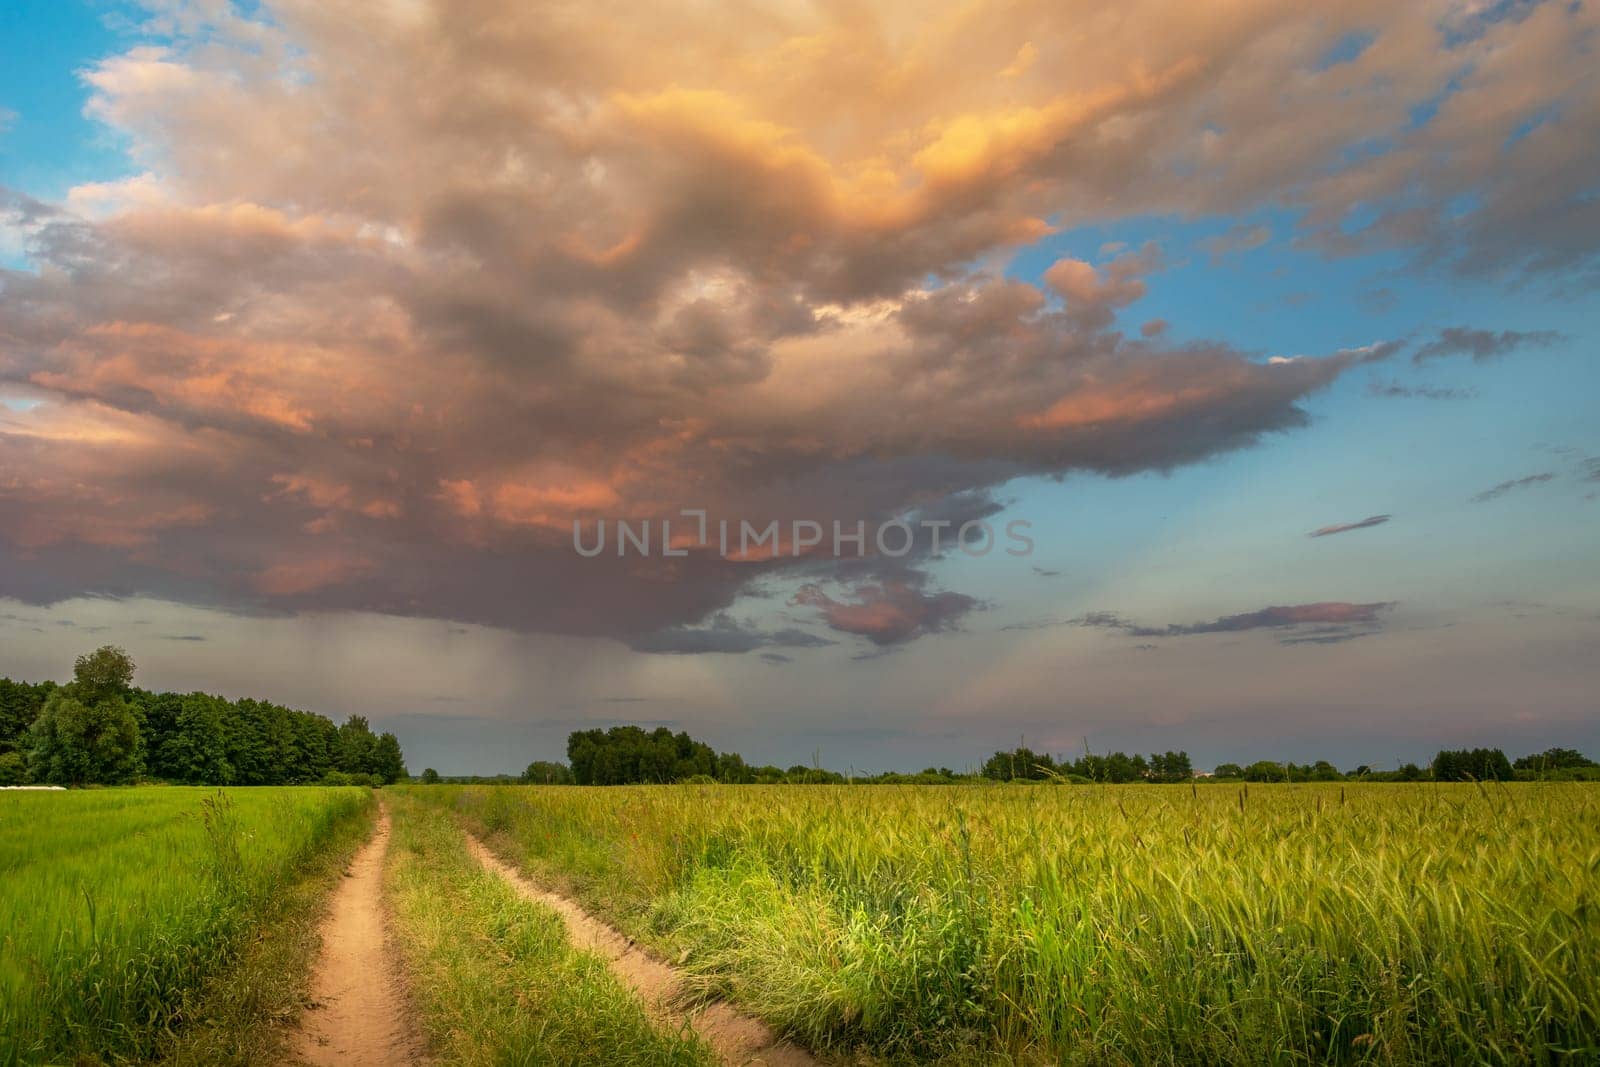 Dirt road next to a field with grain and clouds highlighted at sunset by darekb22